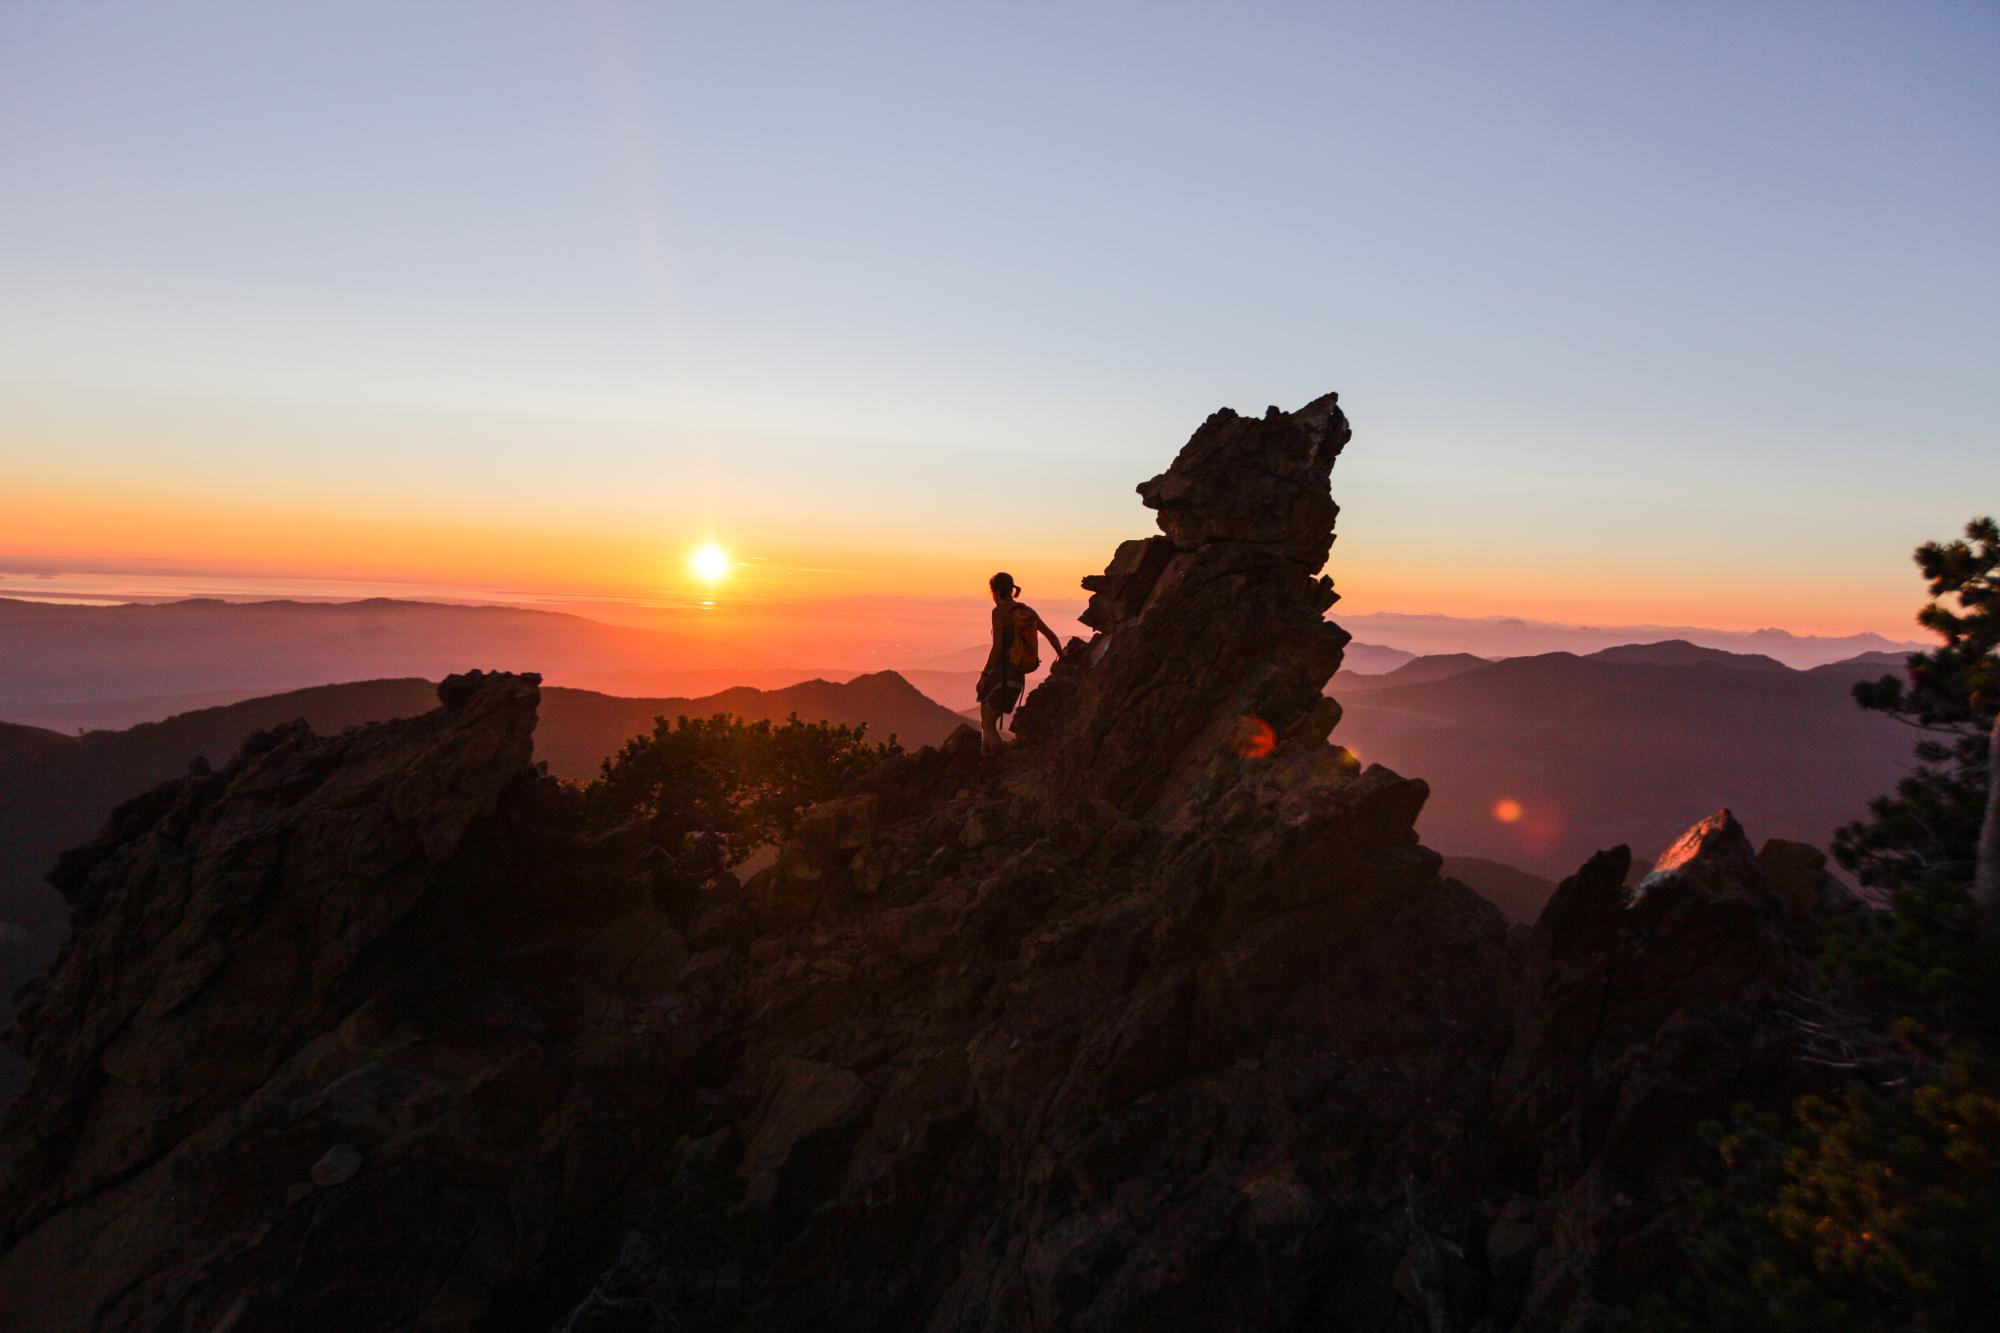 A person standing on a craggy peak viewing a sunset